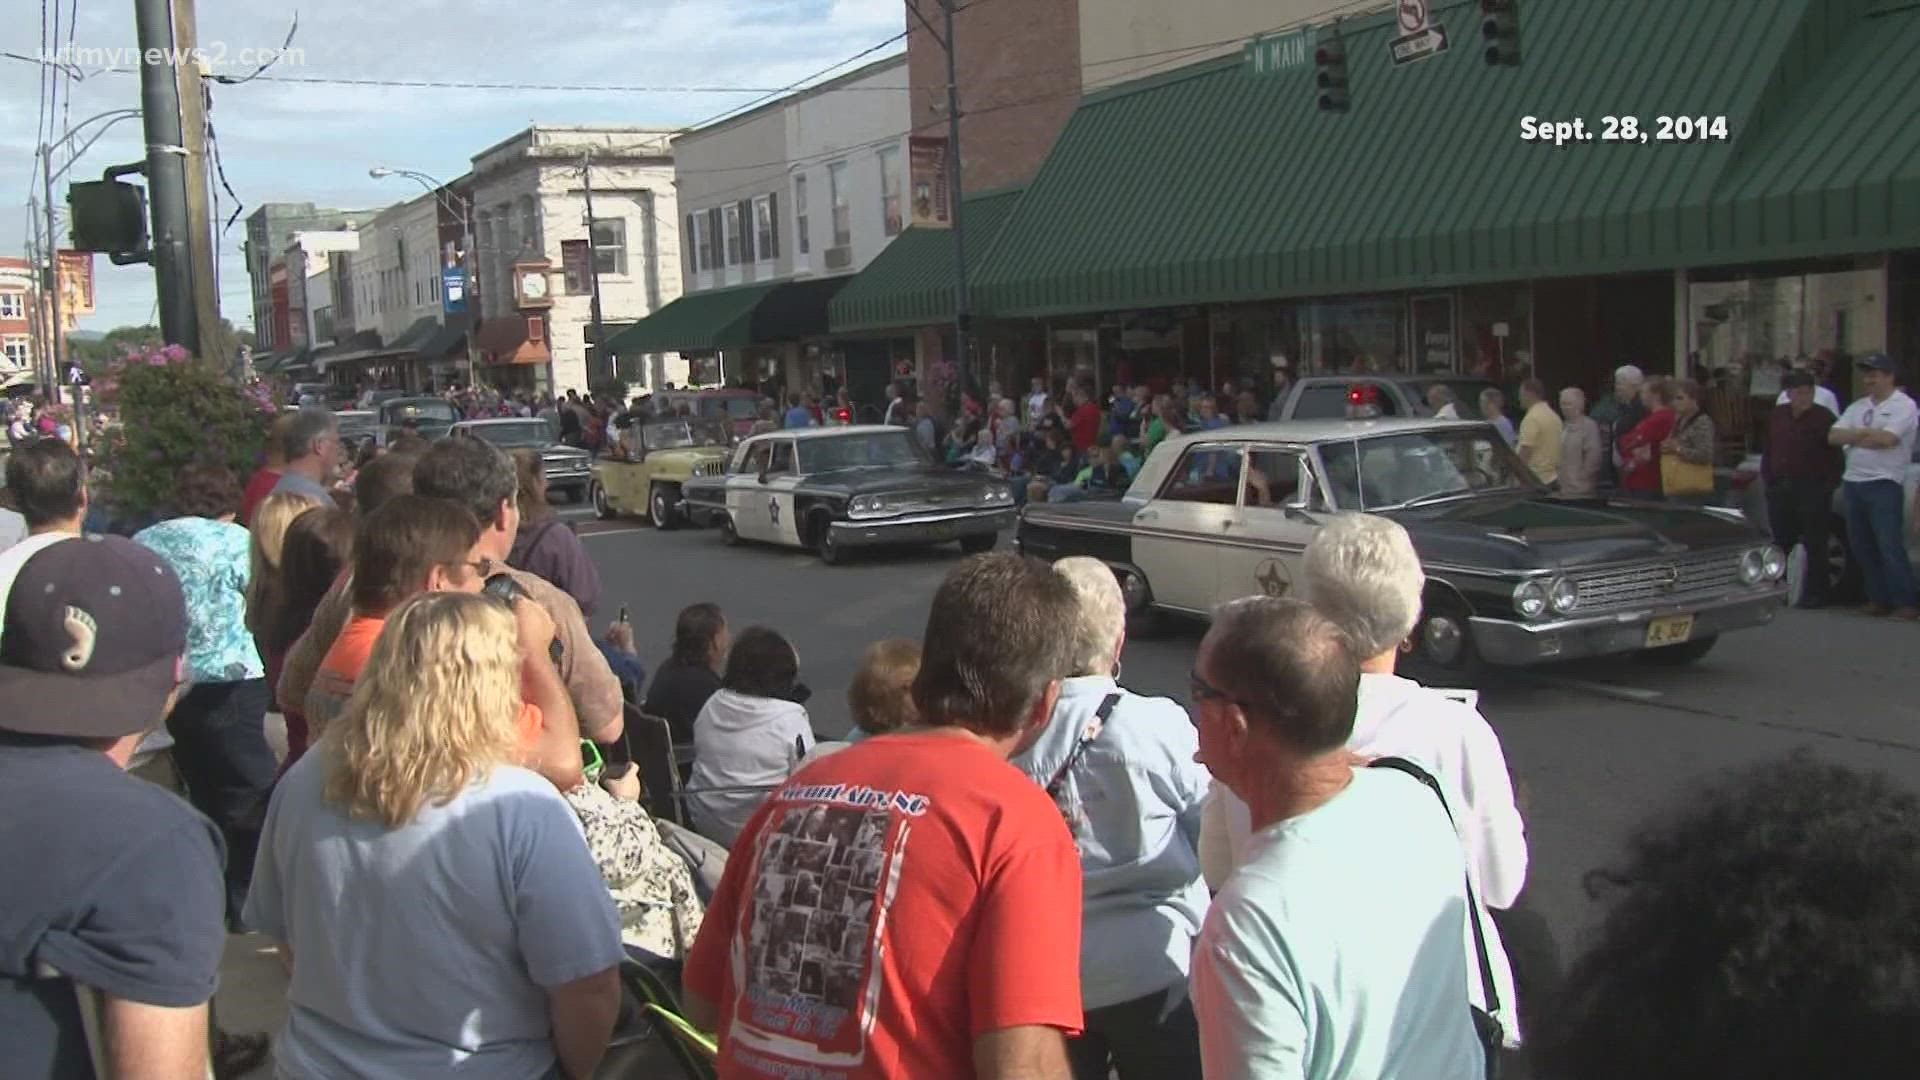 This year’s “Mayberry Days Festival” in Mount Airy gives fans of The Andy Griffith show a chance to meet big names that appeared on the show.